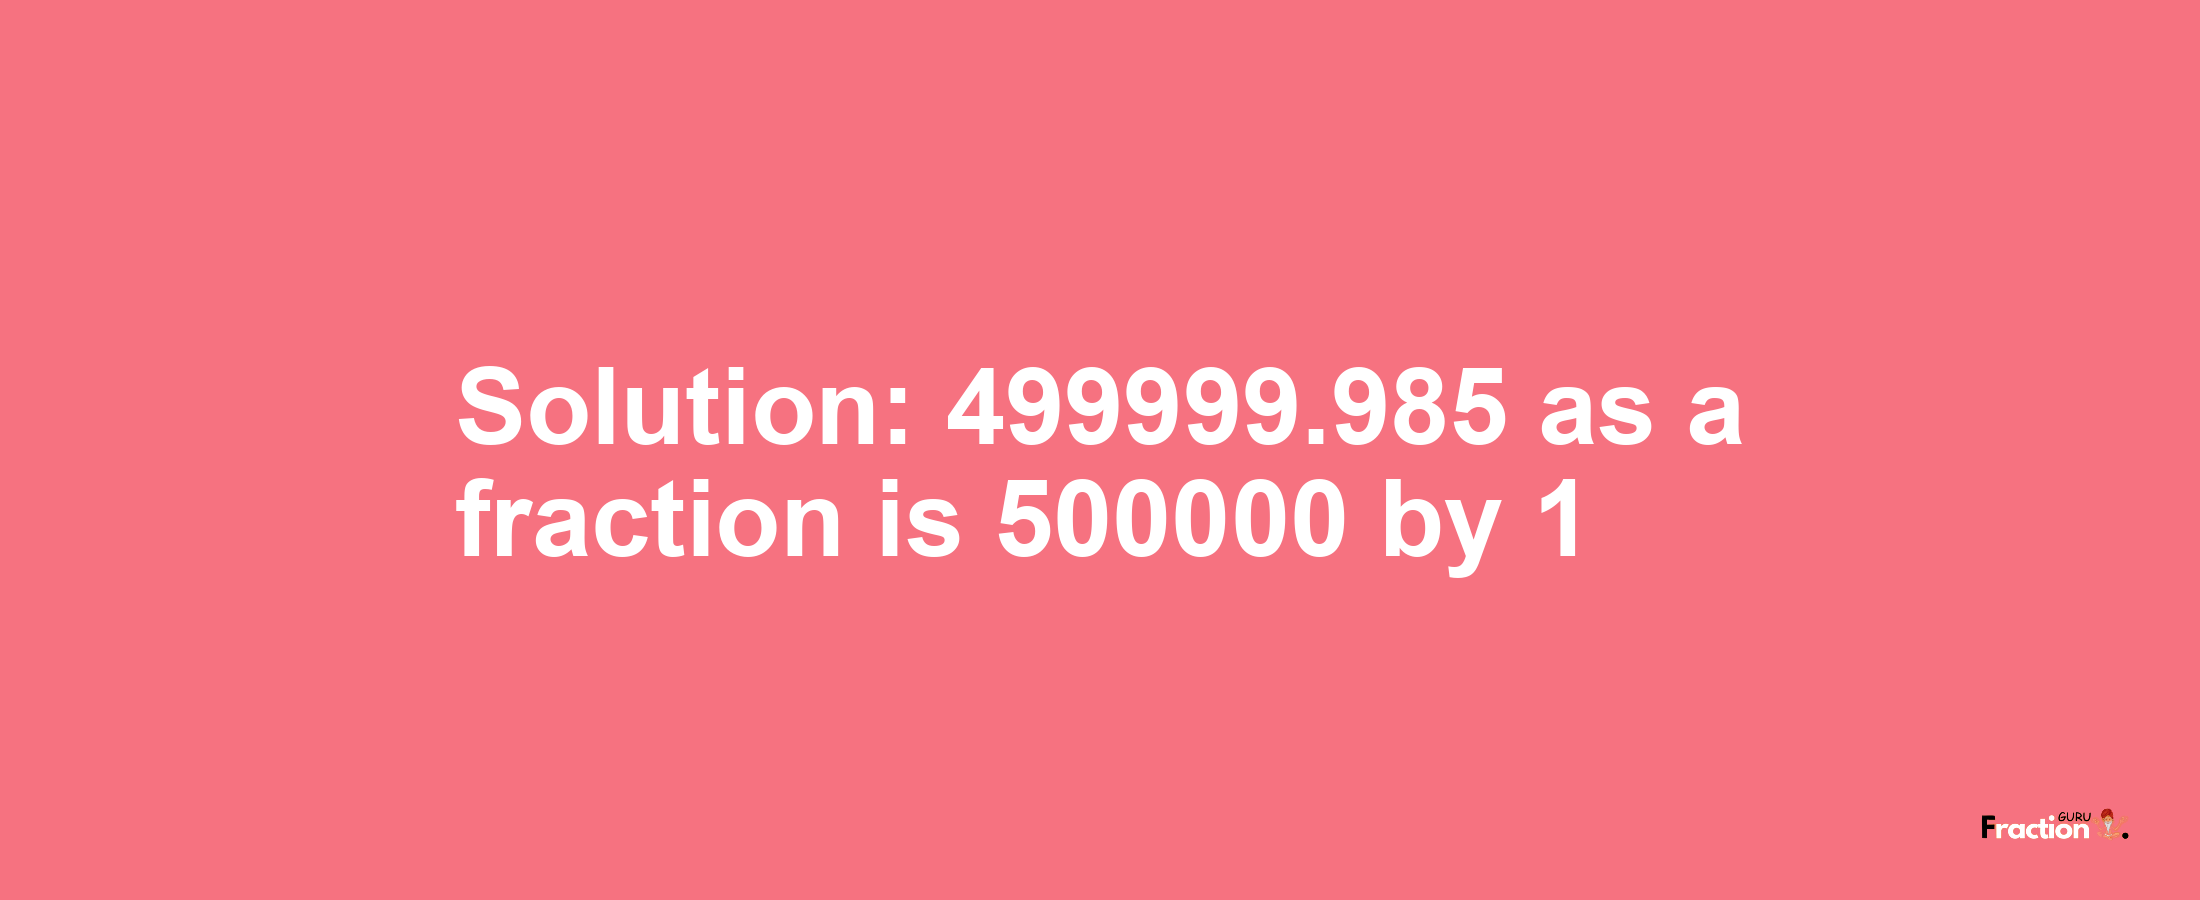 Solution:499999.985 as a fraction is 500000/1